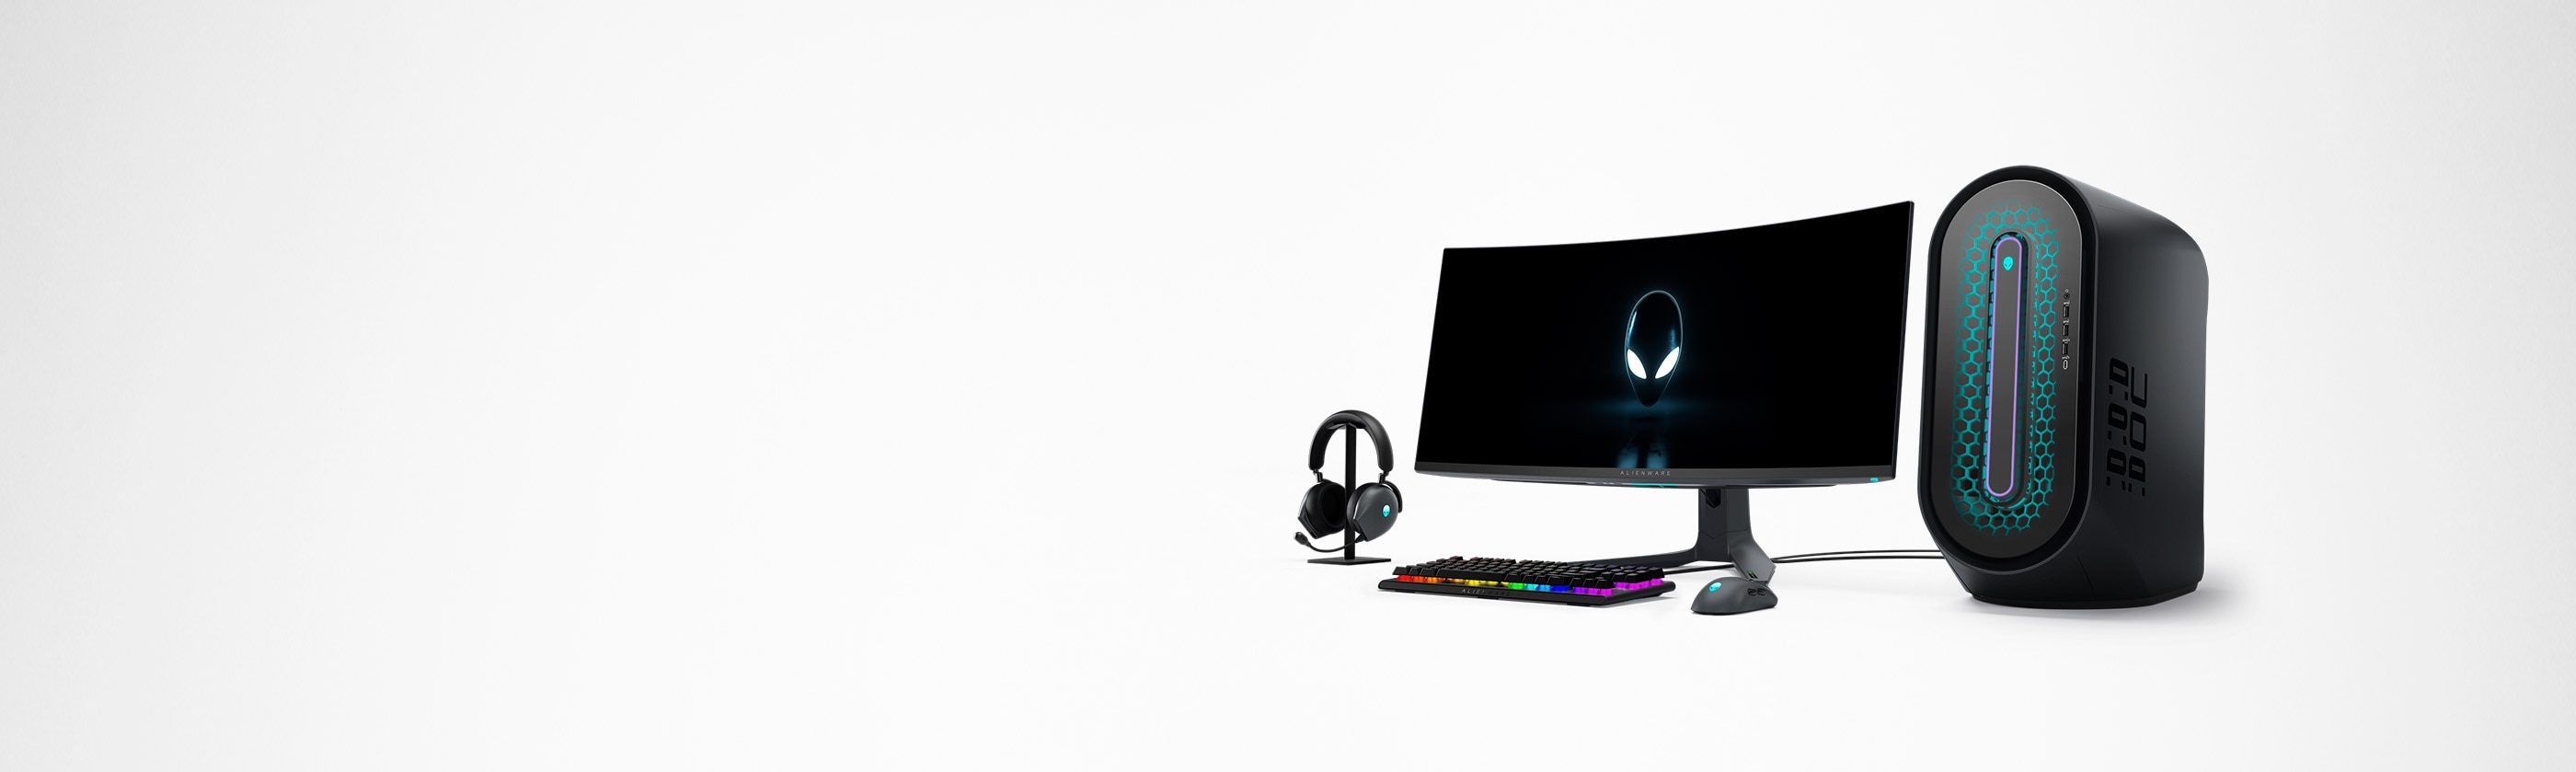 Gaming Towers - Alienware Gaming Desktop Computers | Dell USA